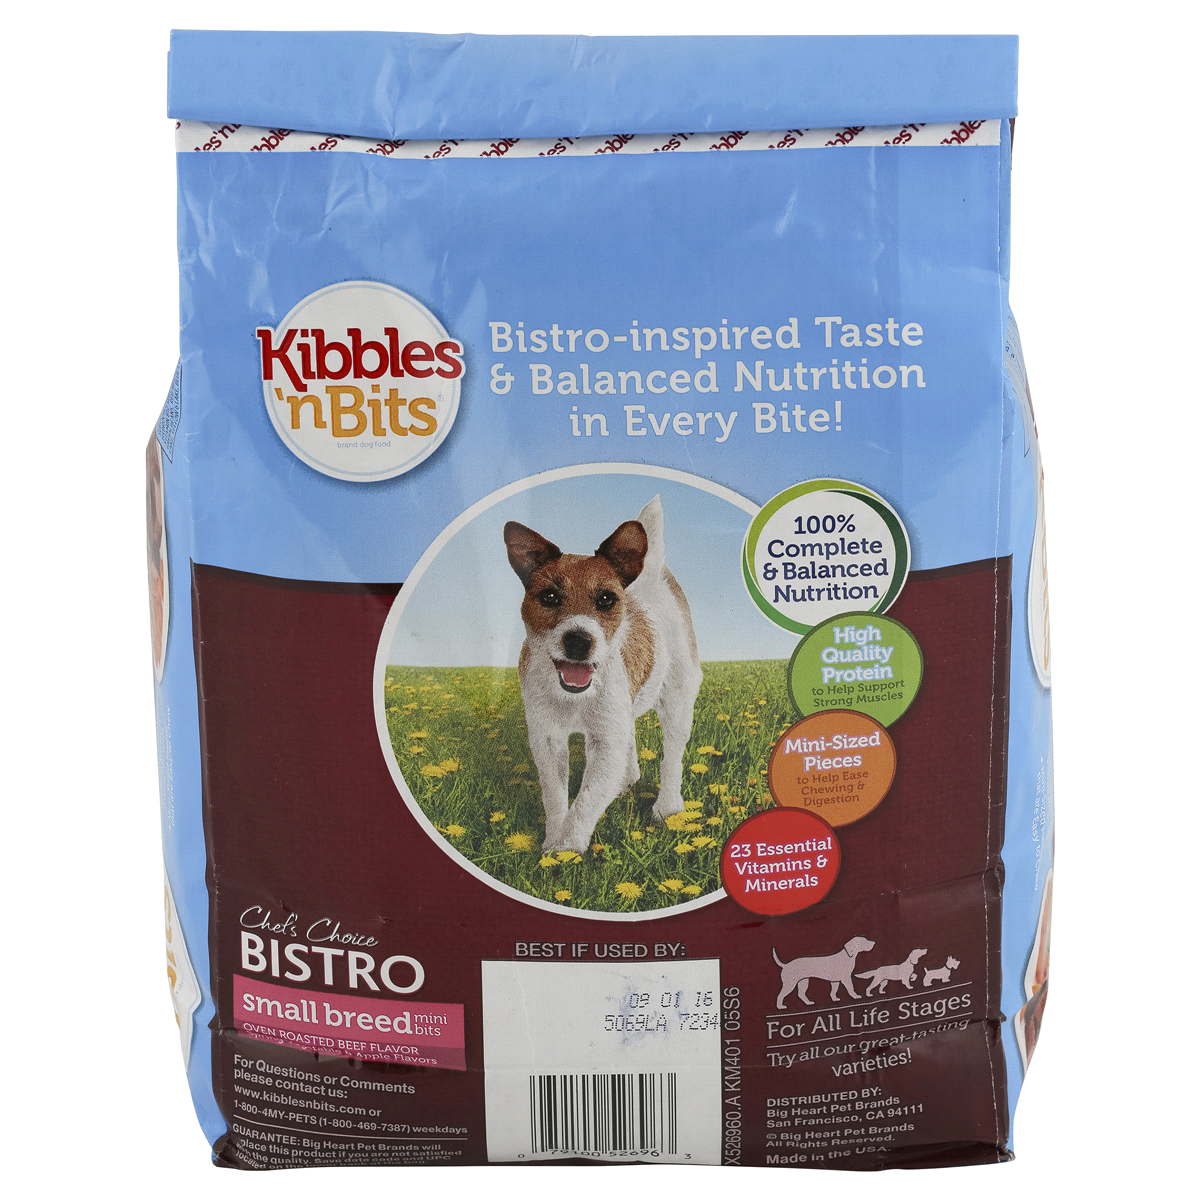 recall on kibbles and bits dog food